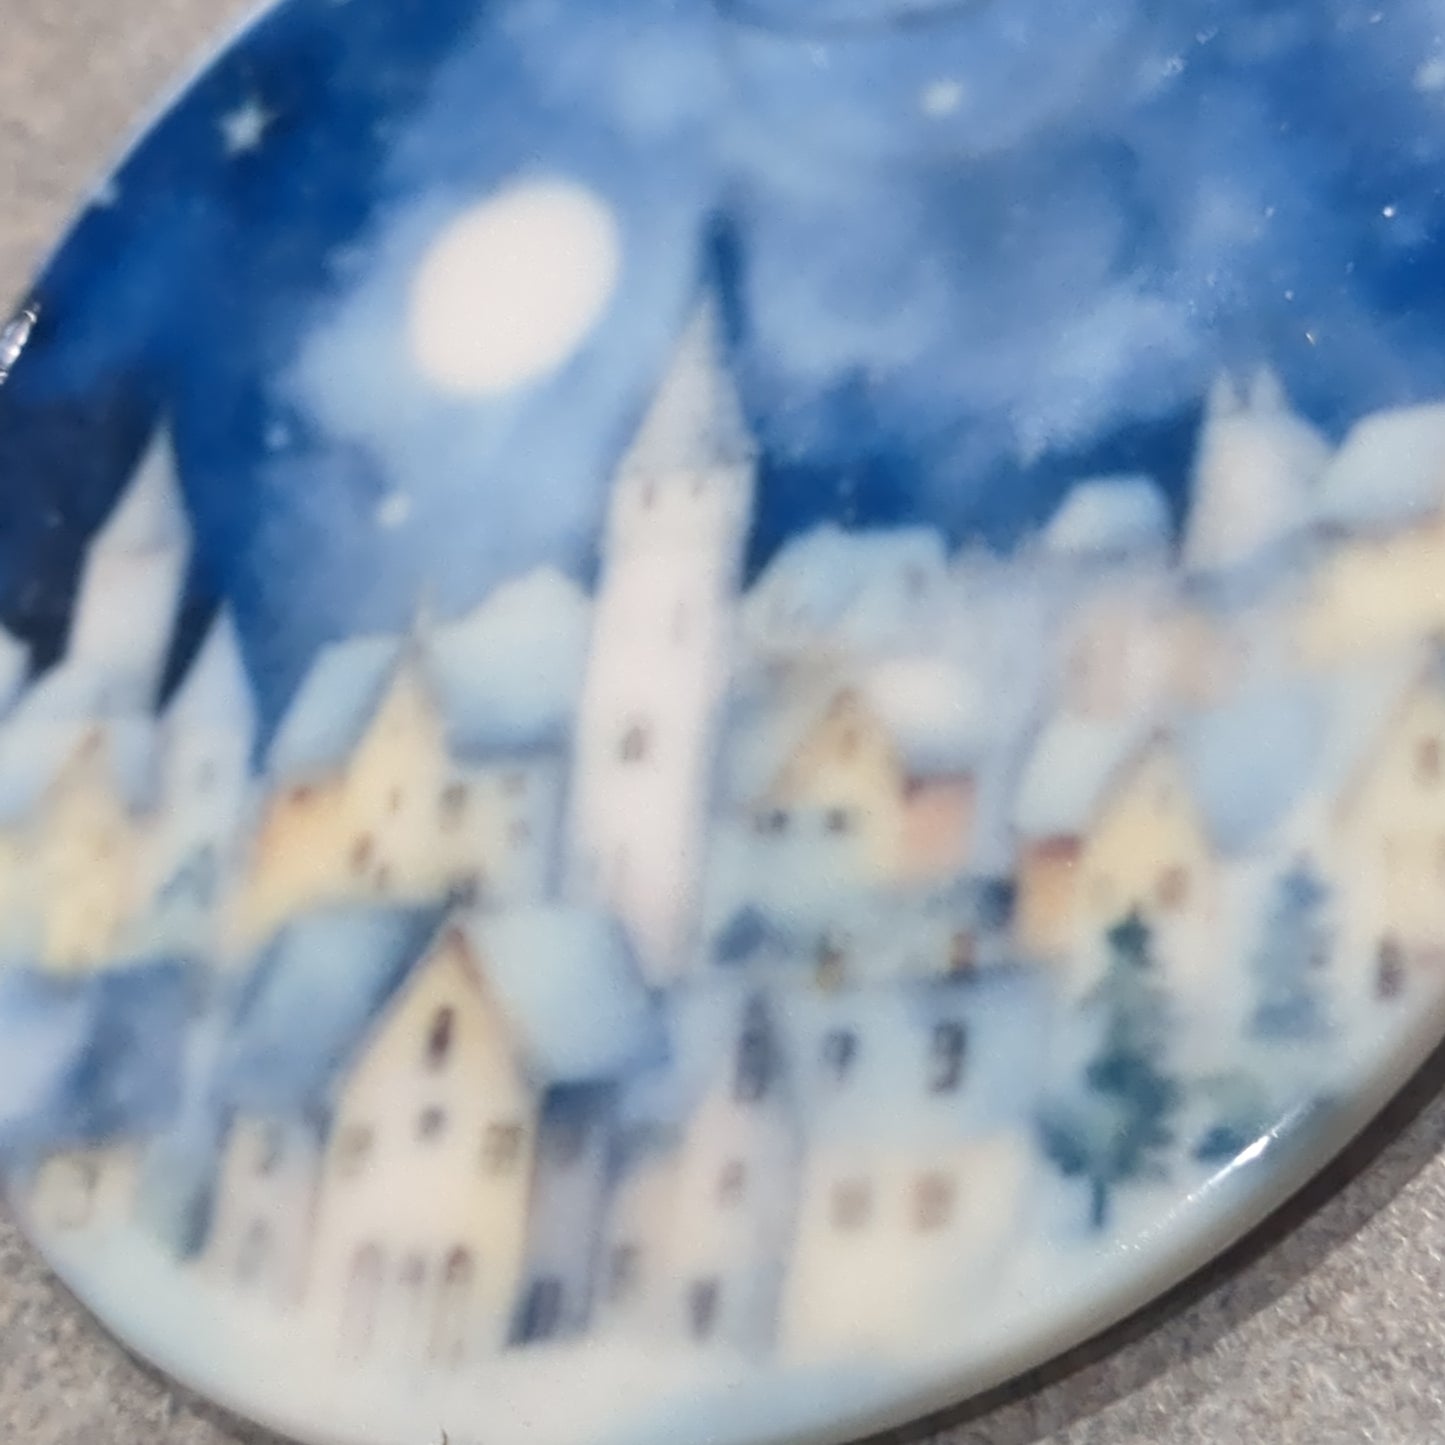 Imperfect Ceramic ornament blue and white city, the image itself is a little blurry